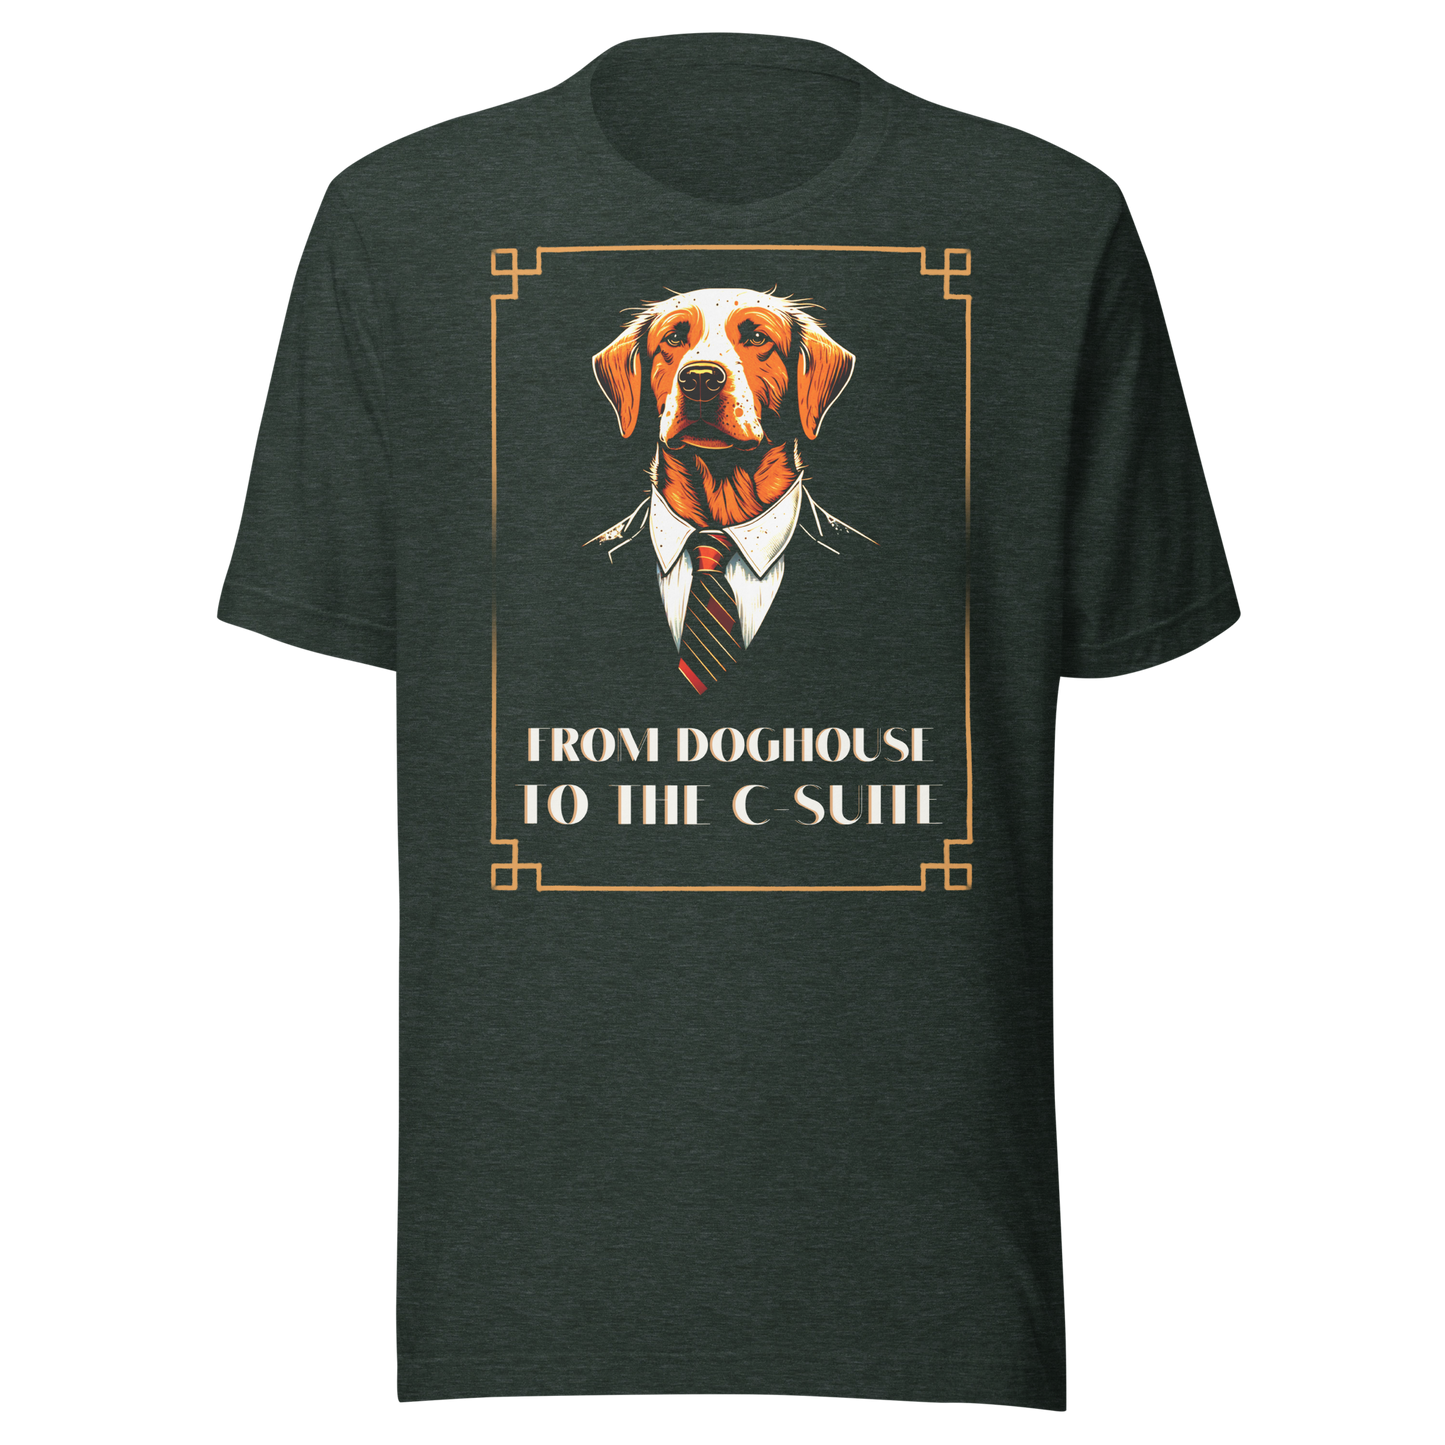 Go from the Doghouse to the C-Suite with our Unisex T-Shirts!